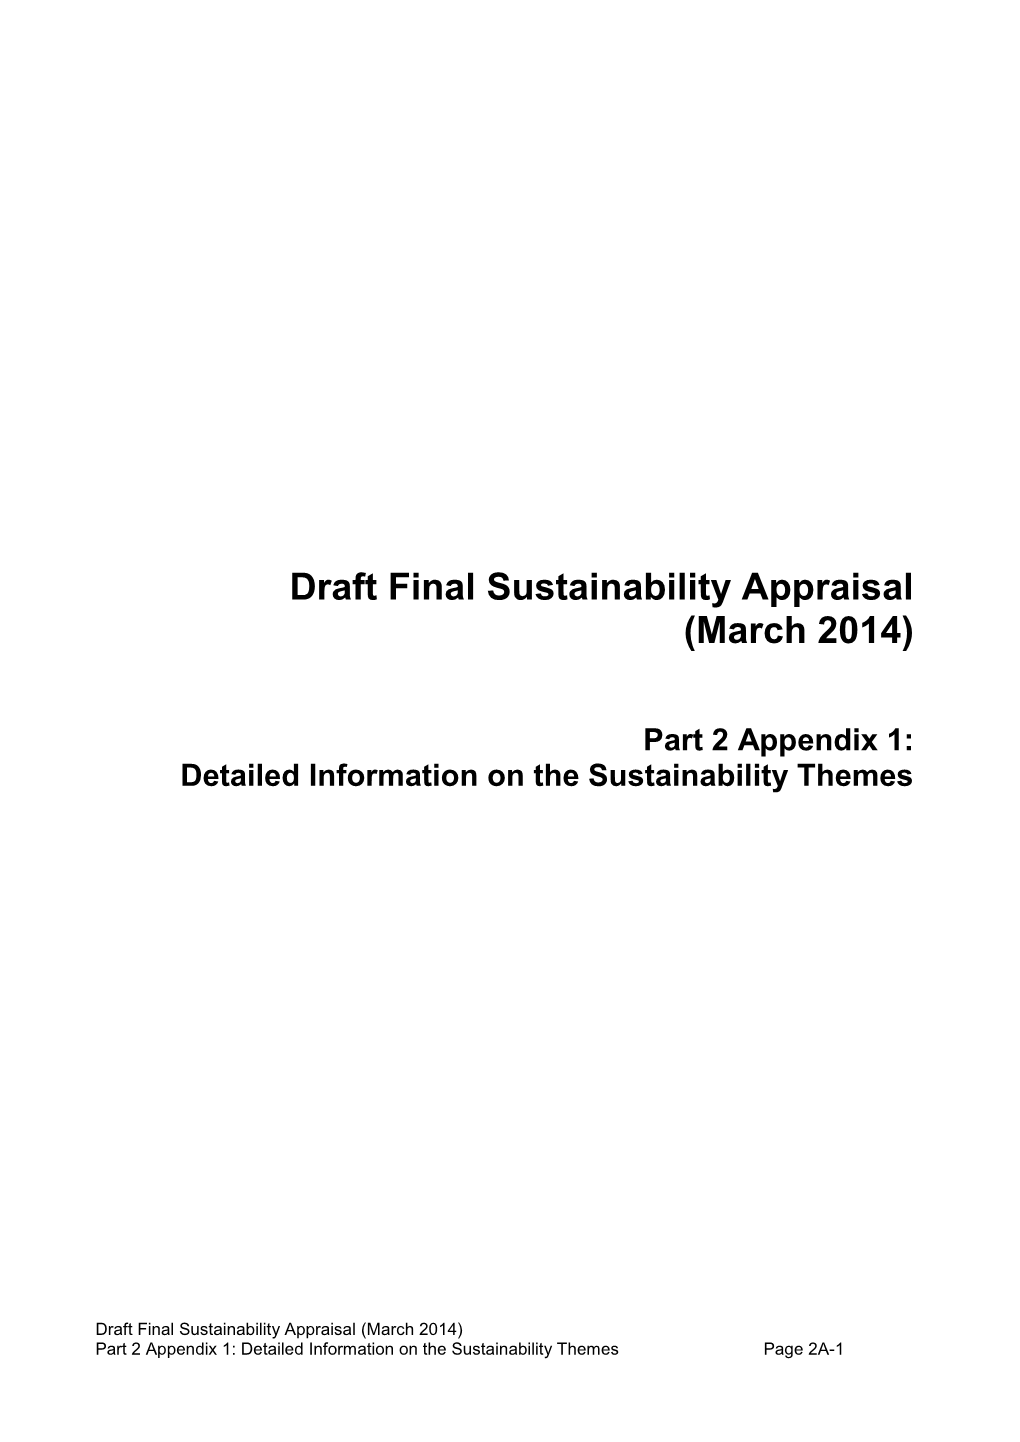 Part 2 Appendix 1: Detailed Information on the Sustainability Themes